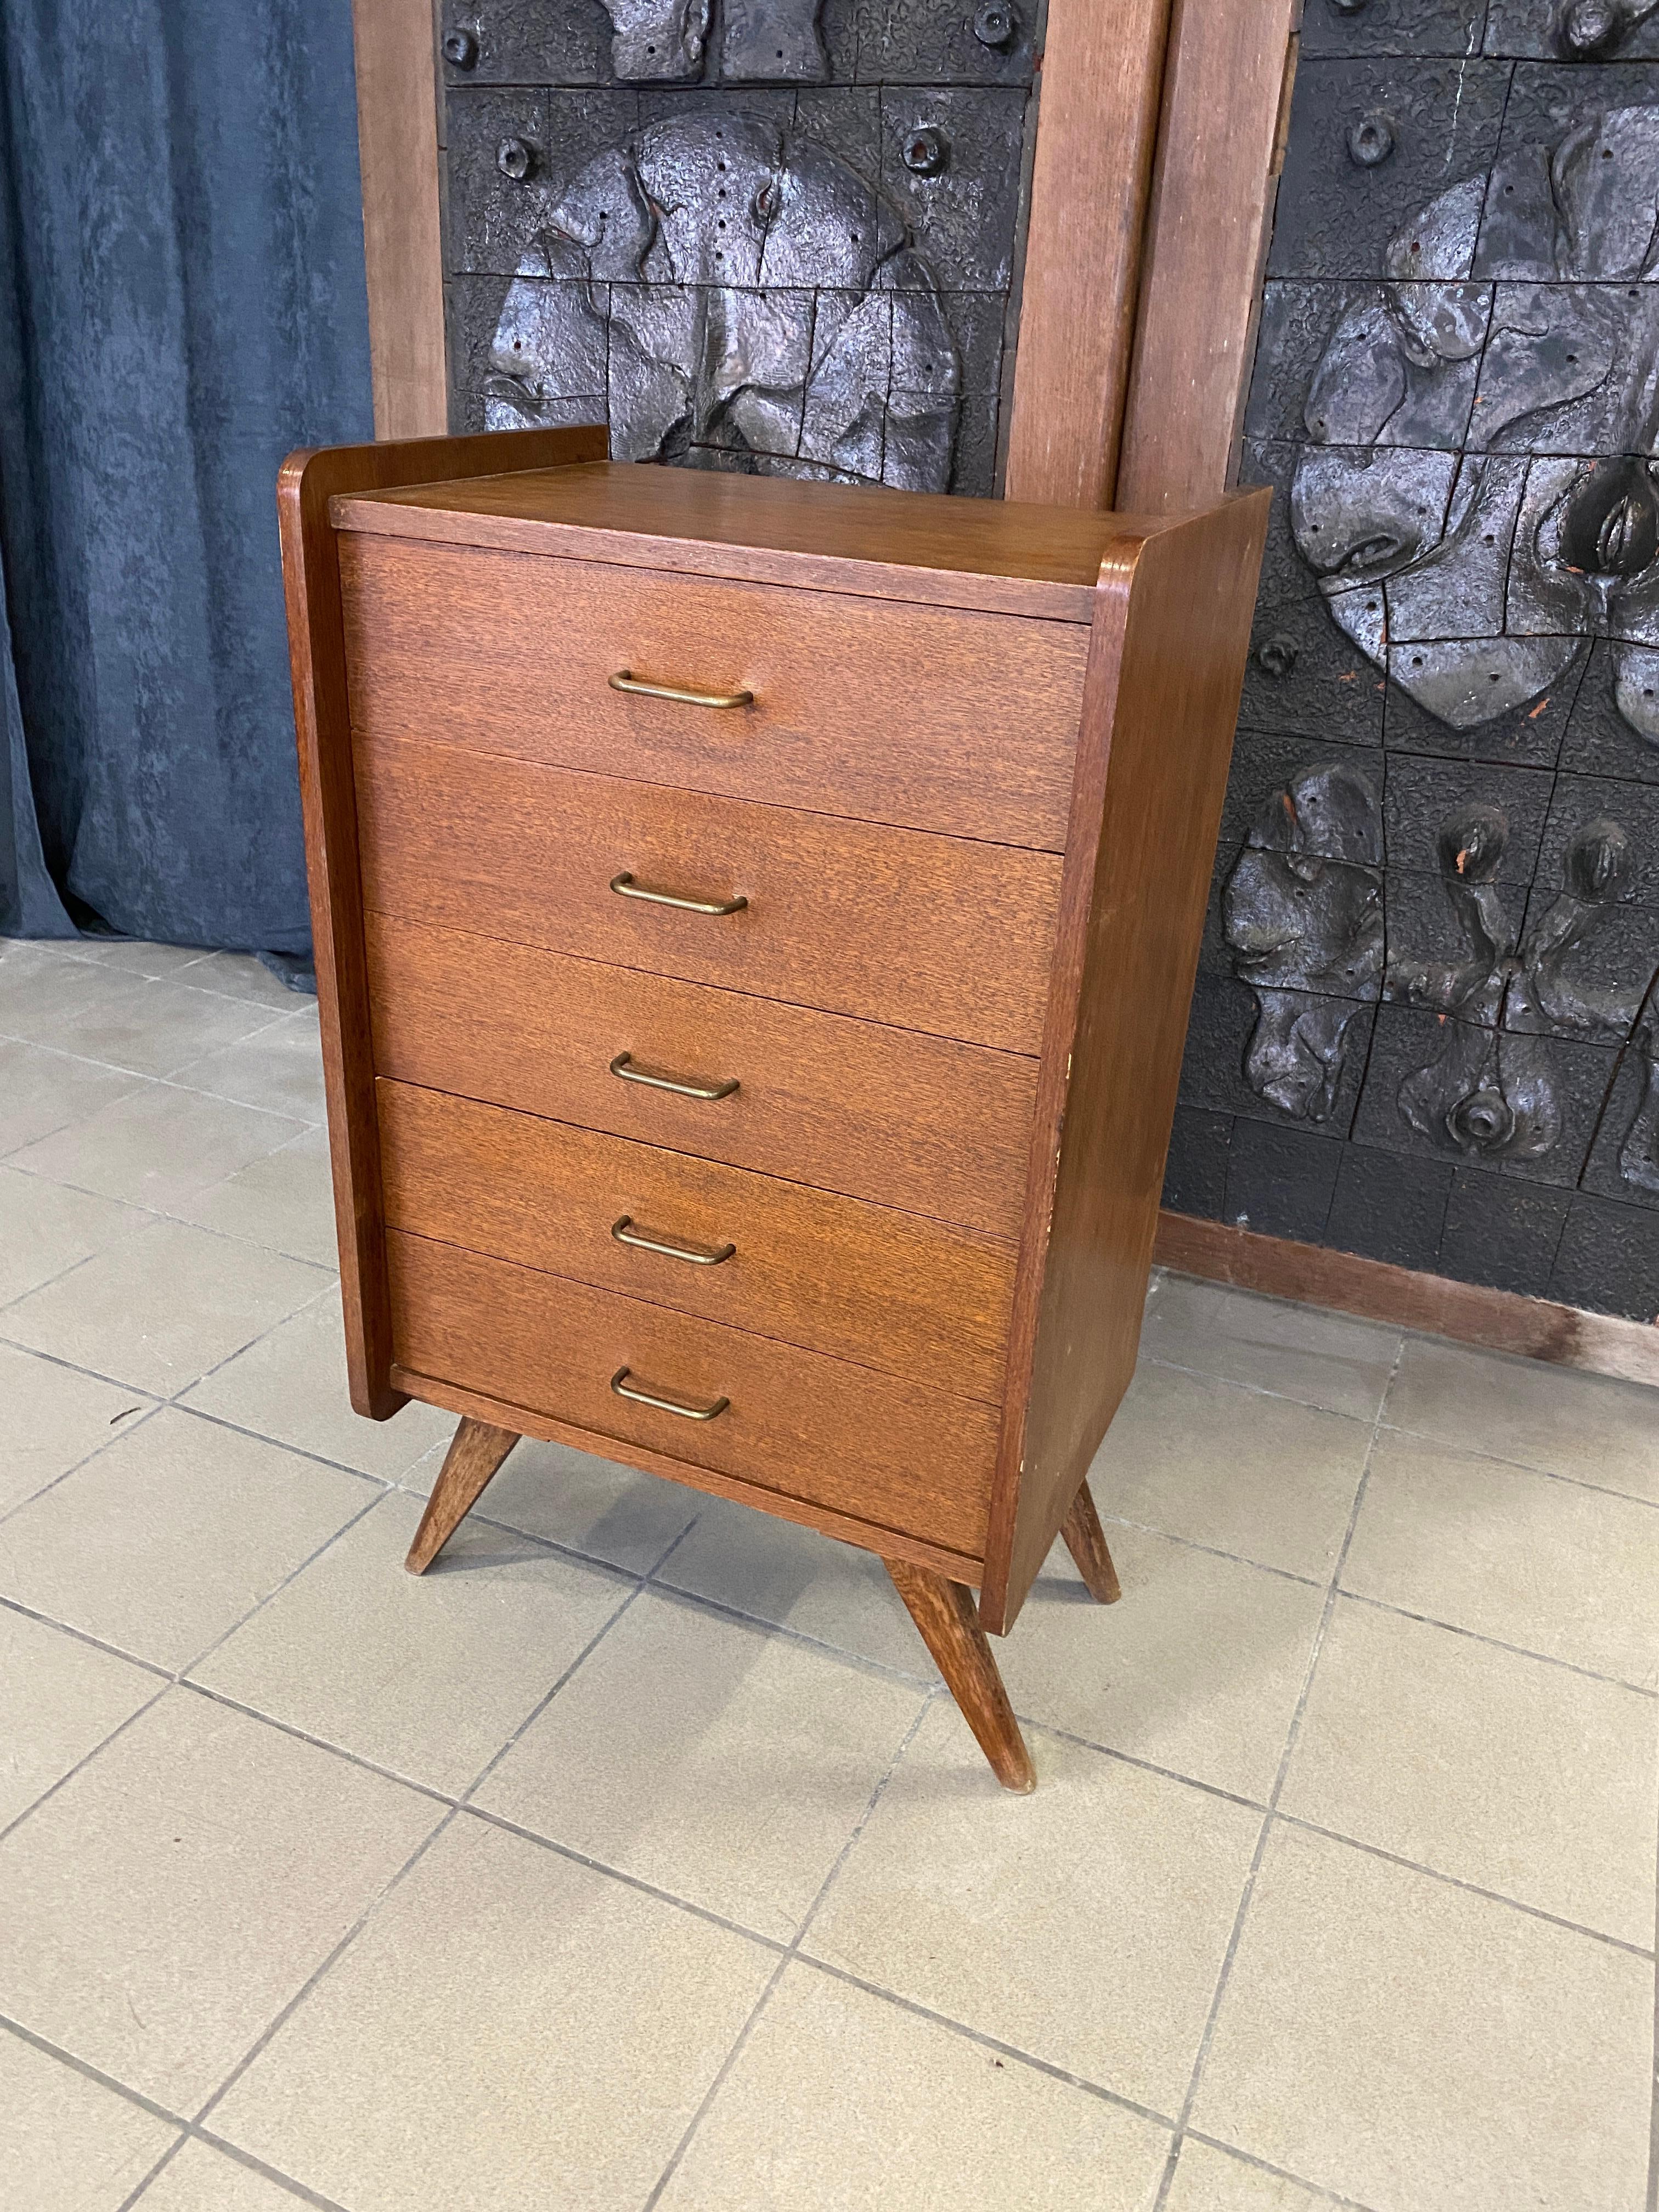 Vintage chest of drawers, French reconstruction period, circa 1950-1960.